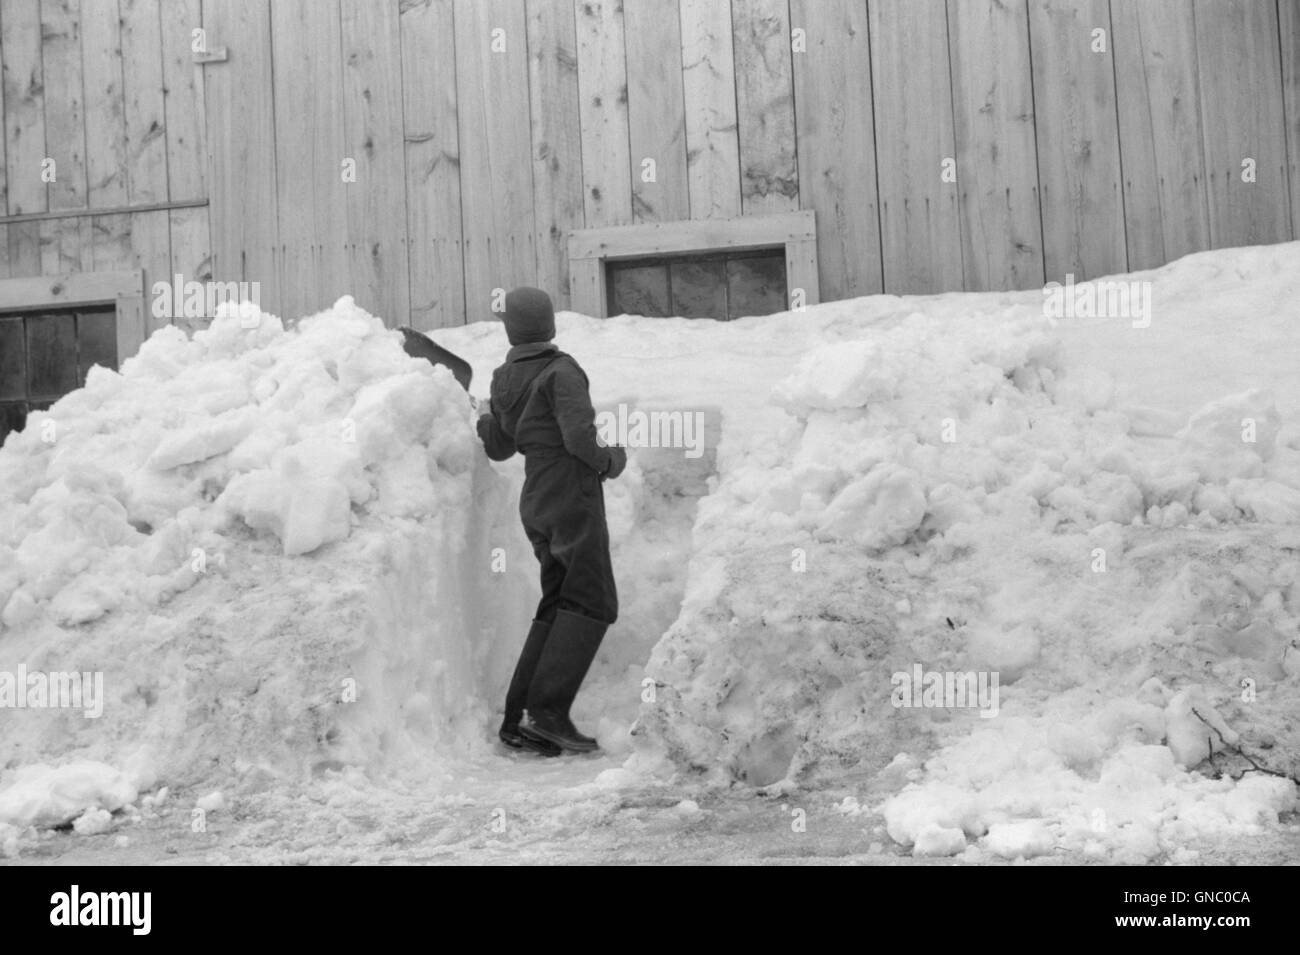 Young Boy Shoveling Snow from Barn Window after Heavy Snowfall, near Woodstock, Vermont, USA, Marion Post Wolcott for Farm Security Administration, April 1940 Stock Photo